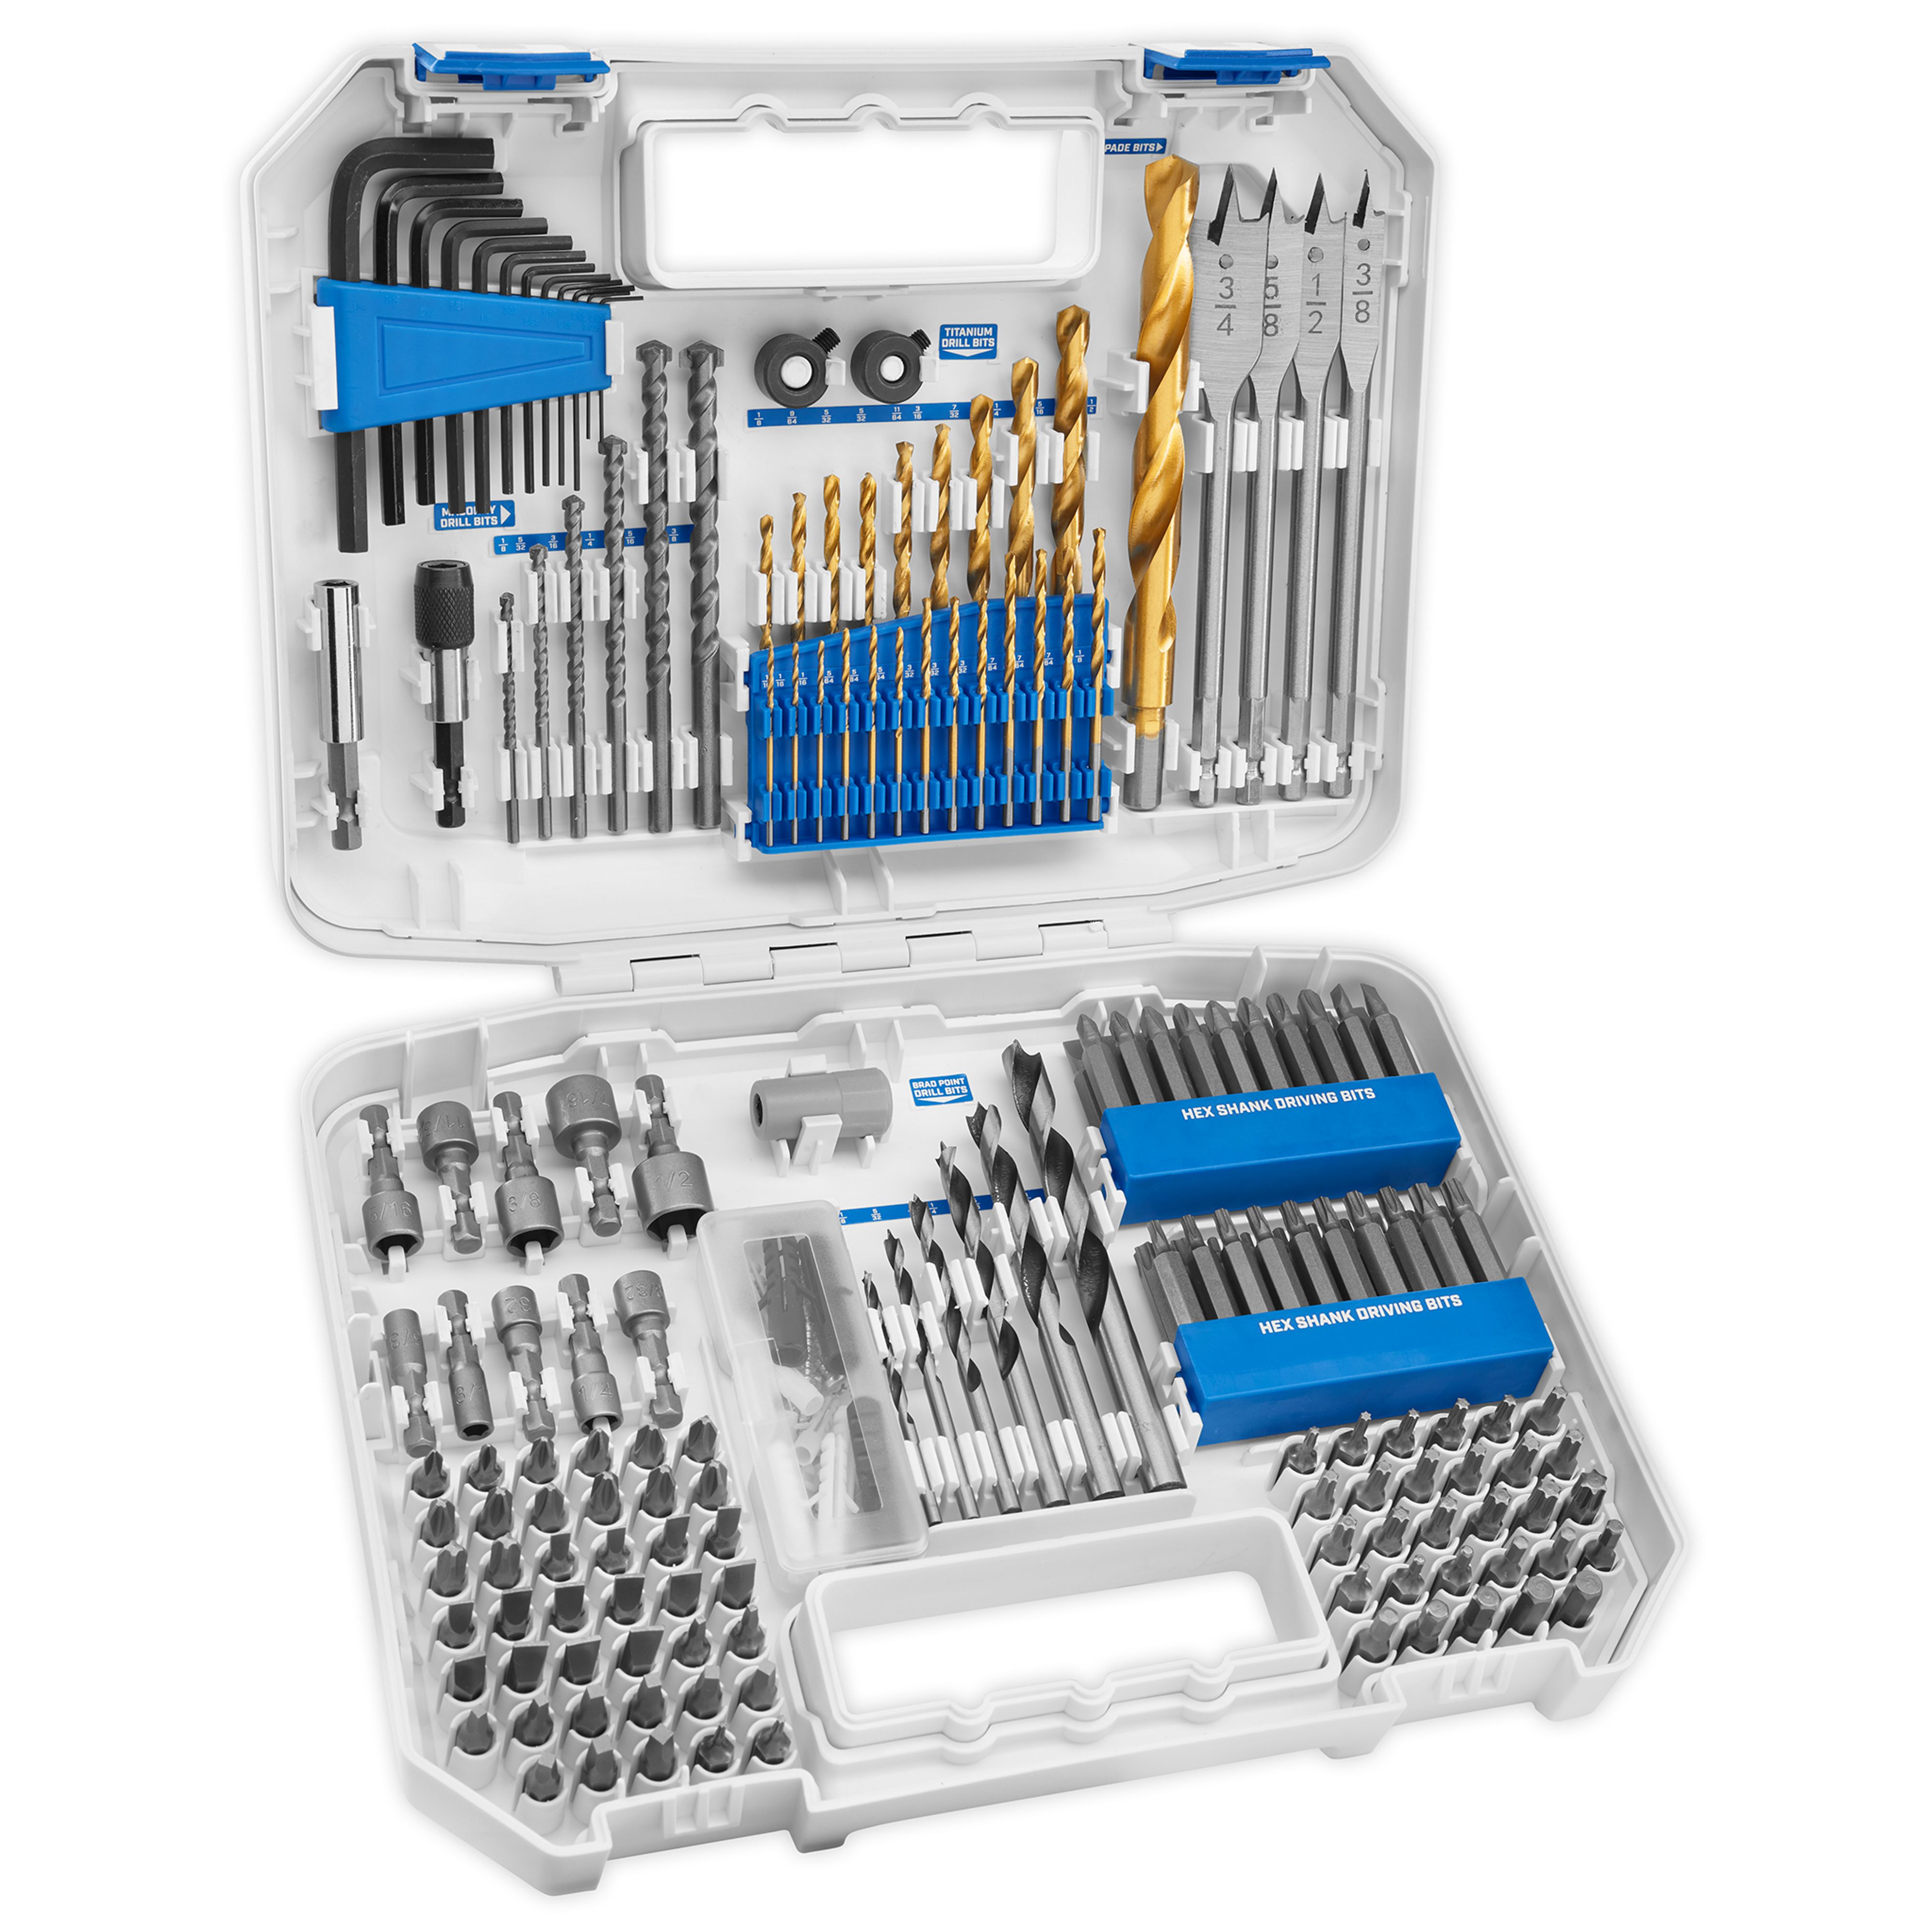 HART 200-Piece Assorted Drill and Drive Bit Set with Storage Case - image 1 of 21